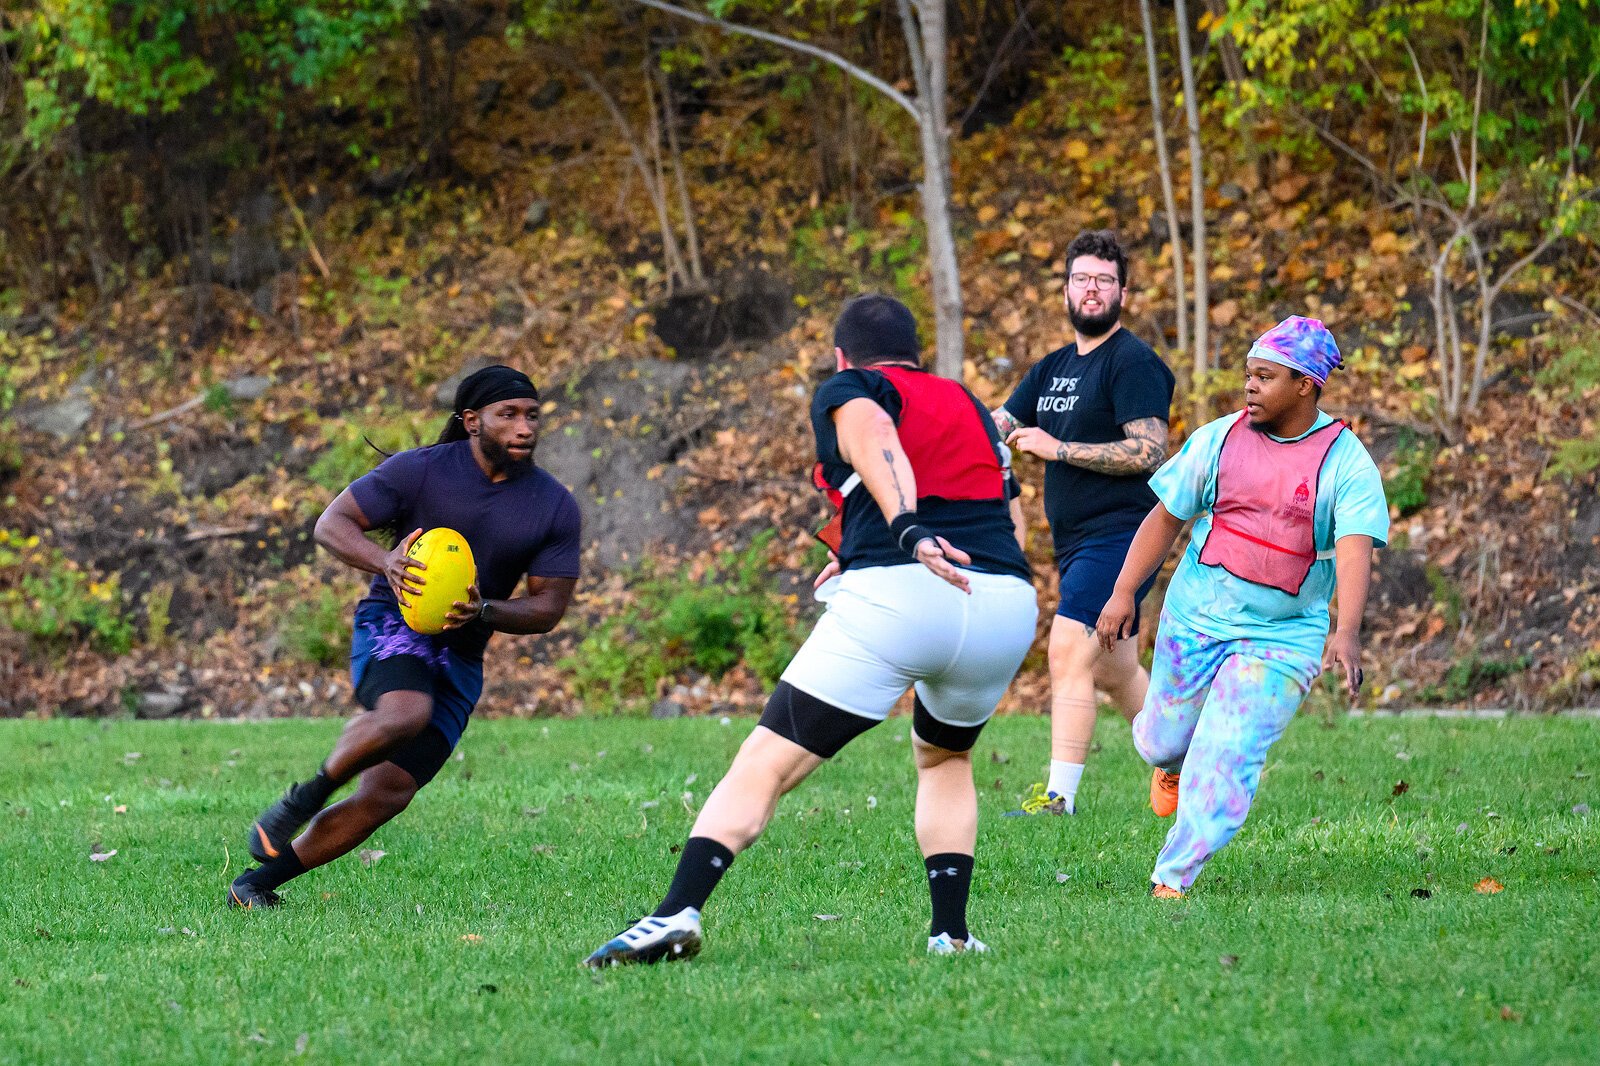 An Ypsilanti Rugby Club Men's and Women's teams practice.